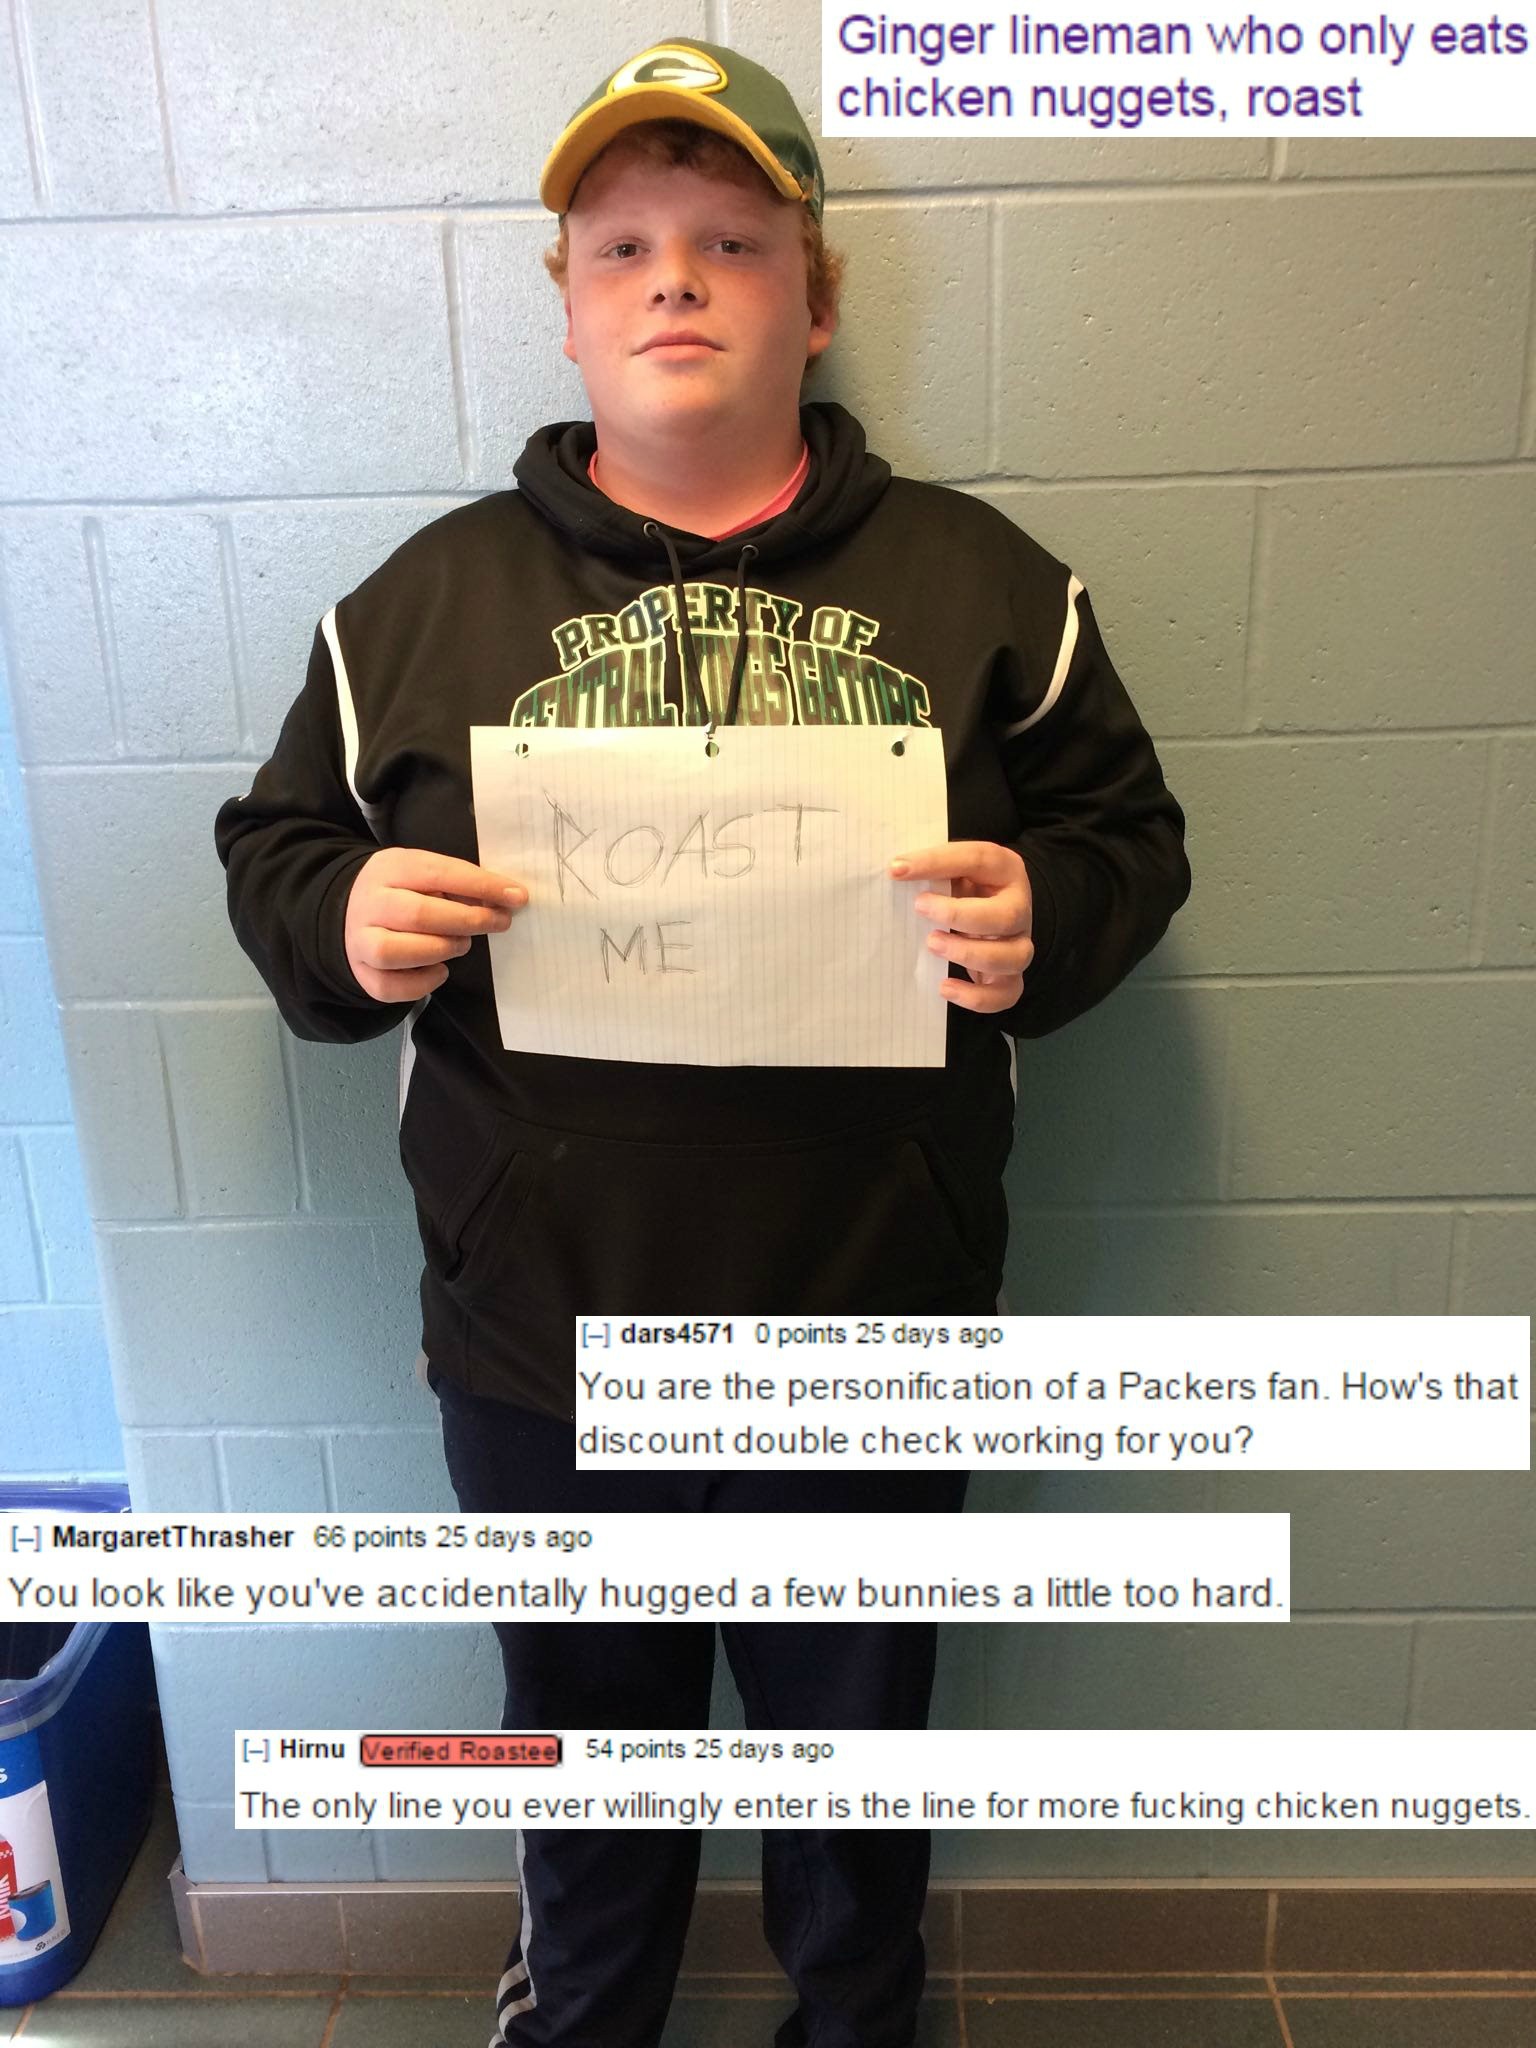 28 Images Showing People Who Foolishly Asked To Be Roasted And Got Shredded Instead